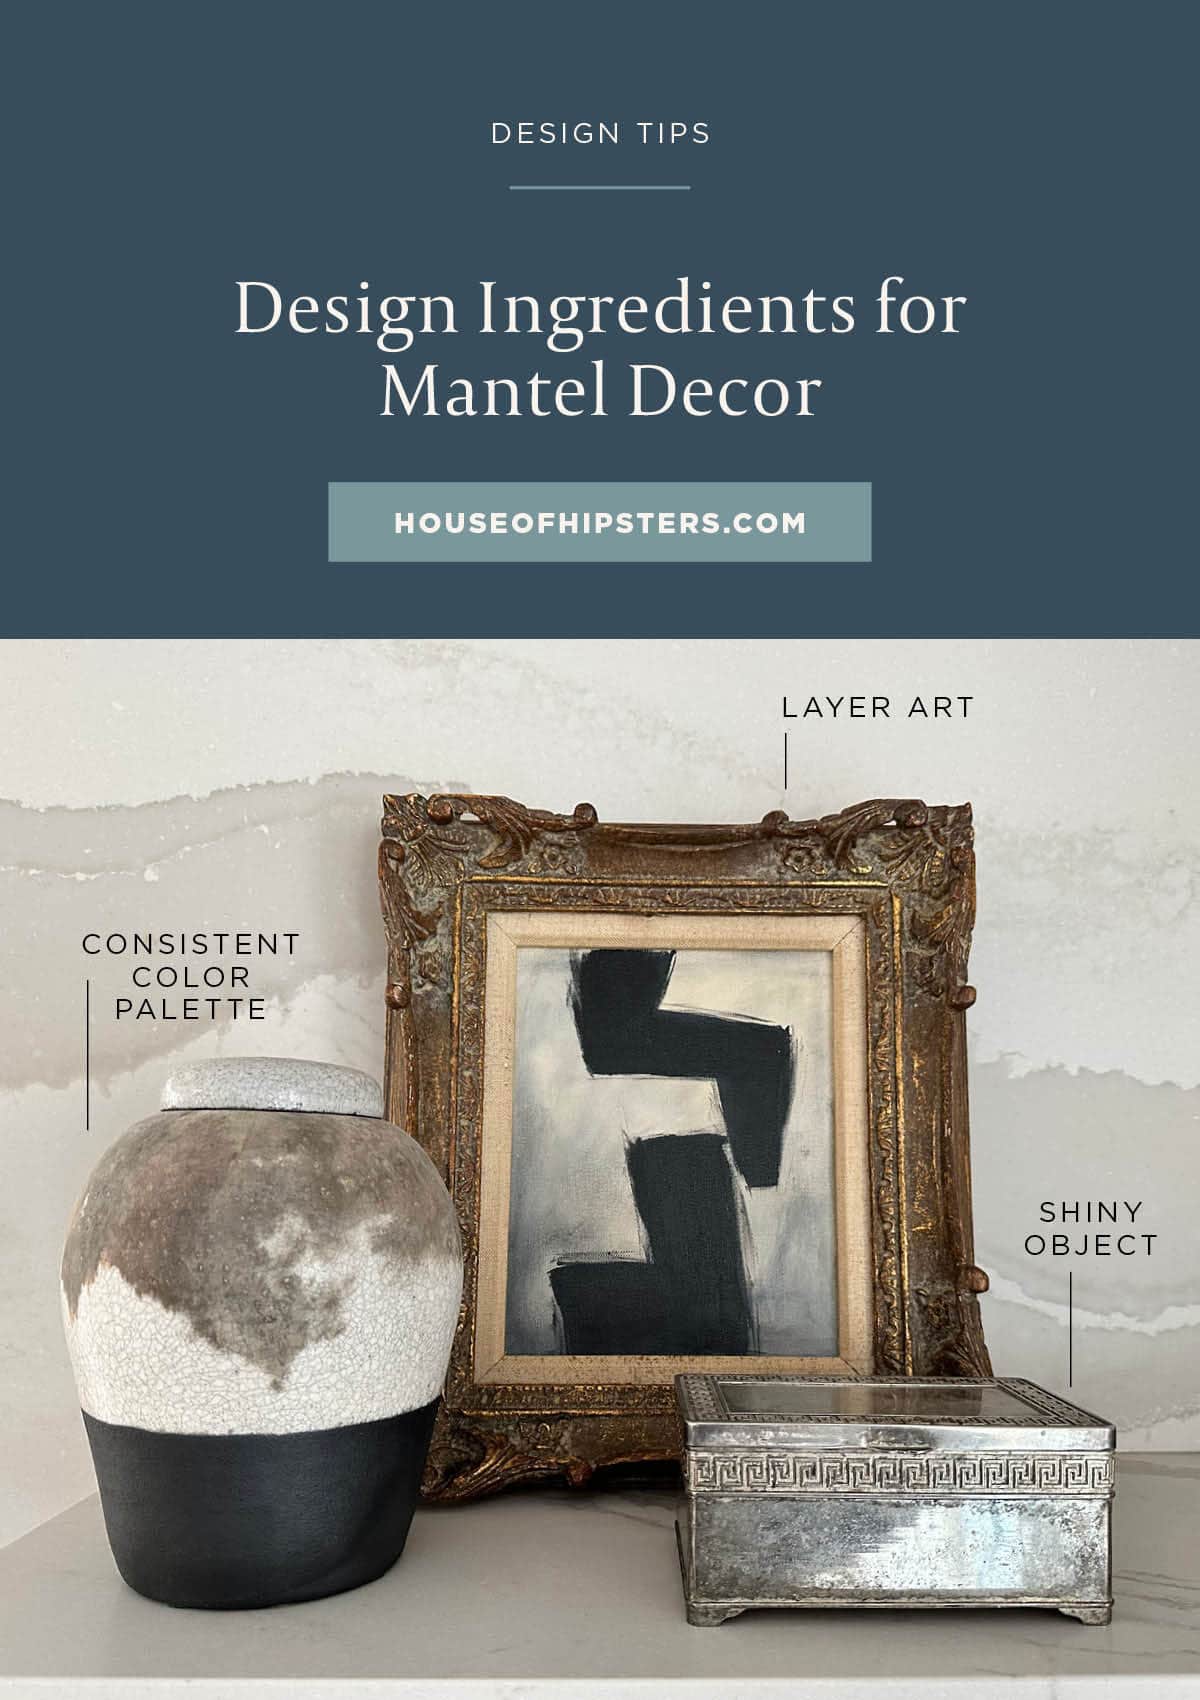 Design Elements for Styling Mantel Decor - Style your mantel decor like a pro with these 5 simple design rules.